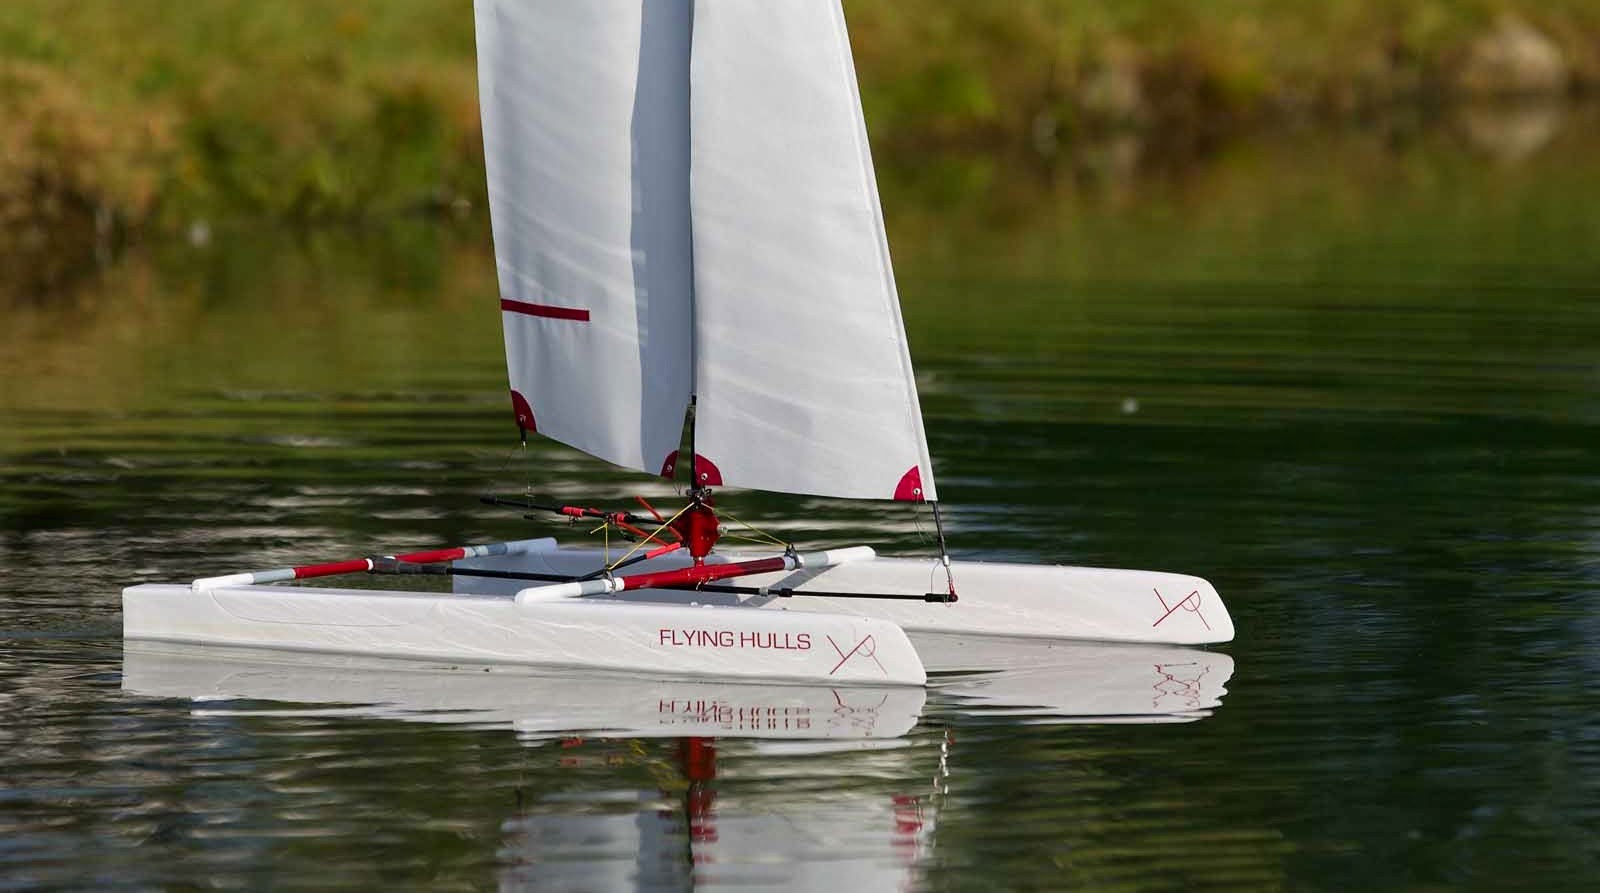 'A40', the RC Model Cat from Flying Hulls Catamaran ...